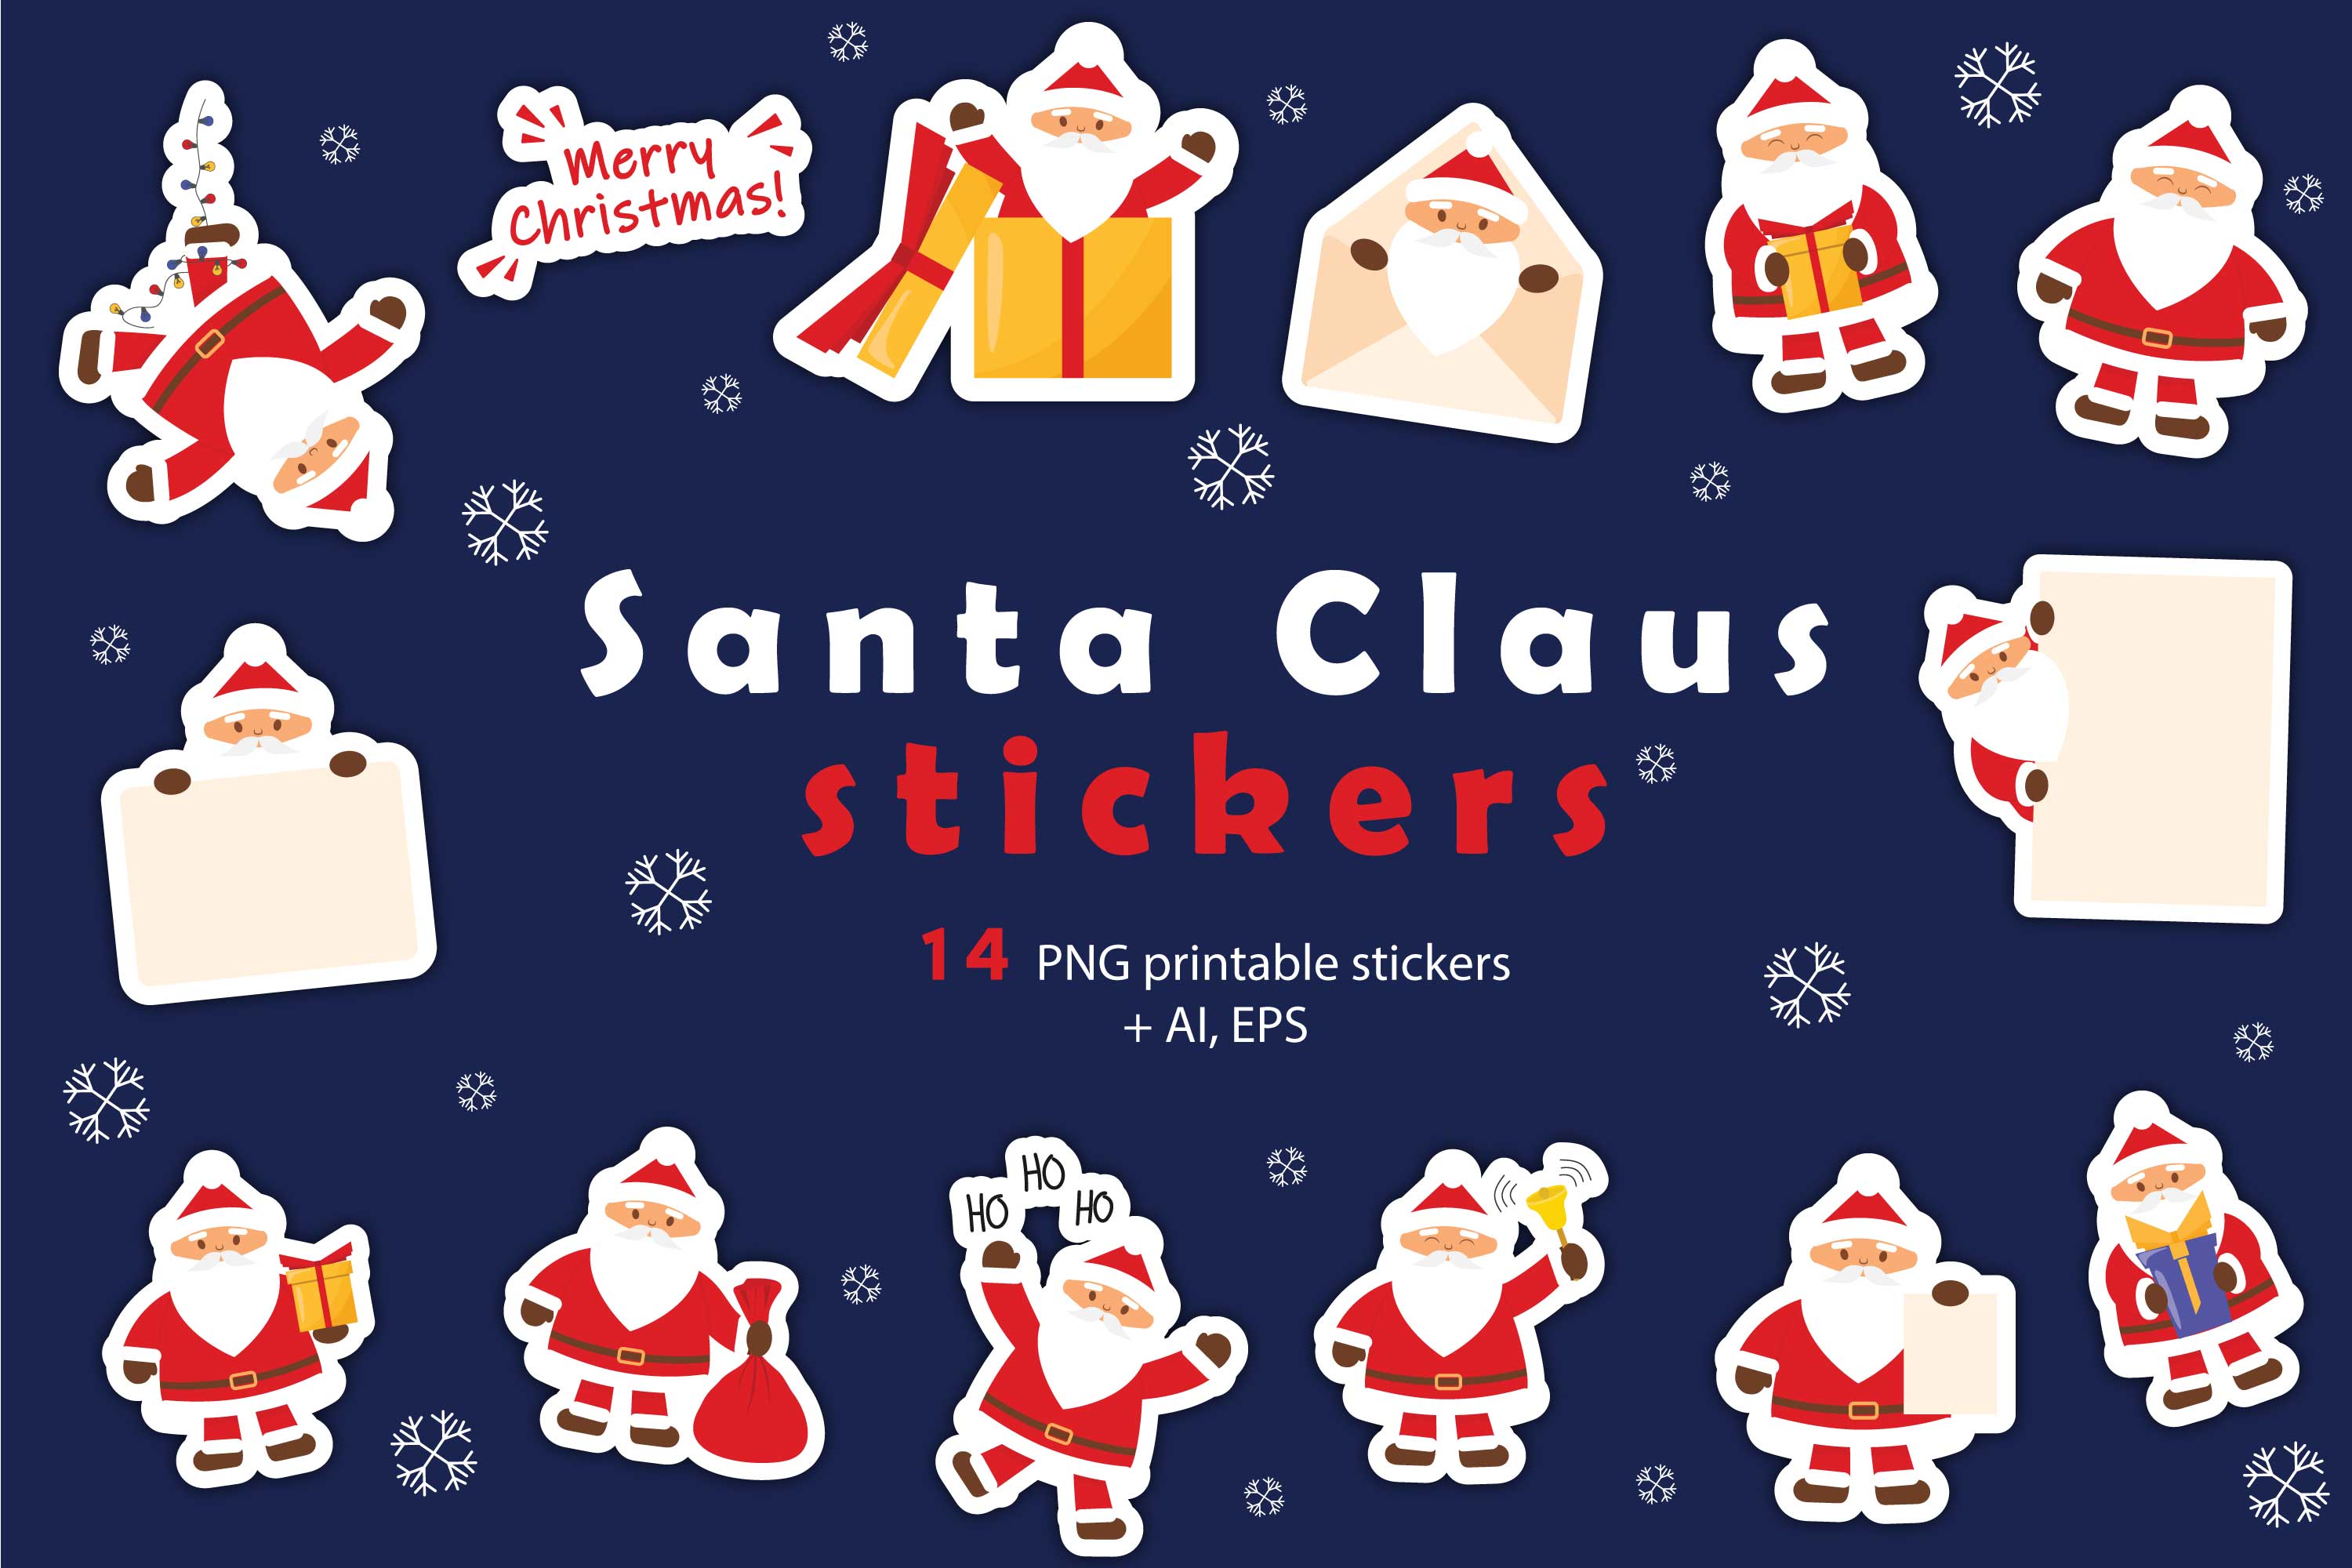 A selection of beautiful images of cute Santa stickers